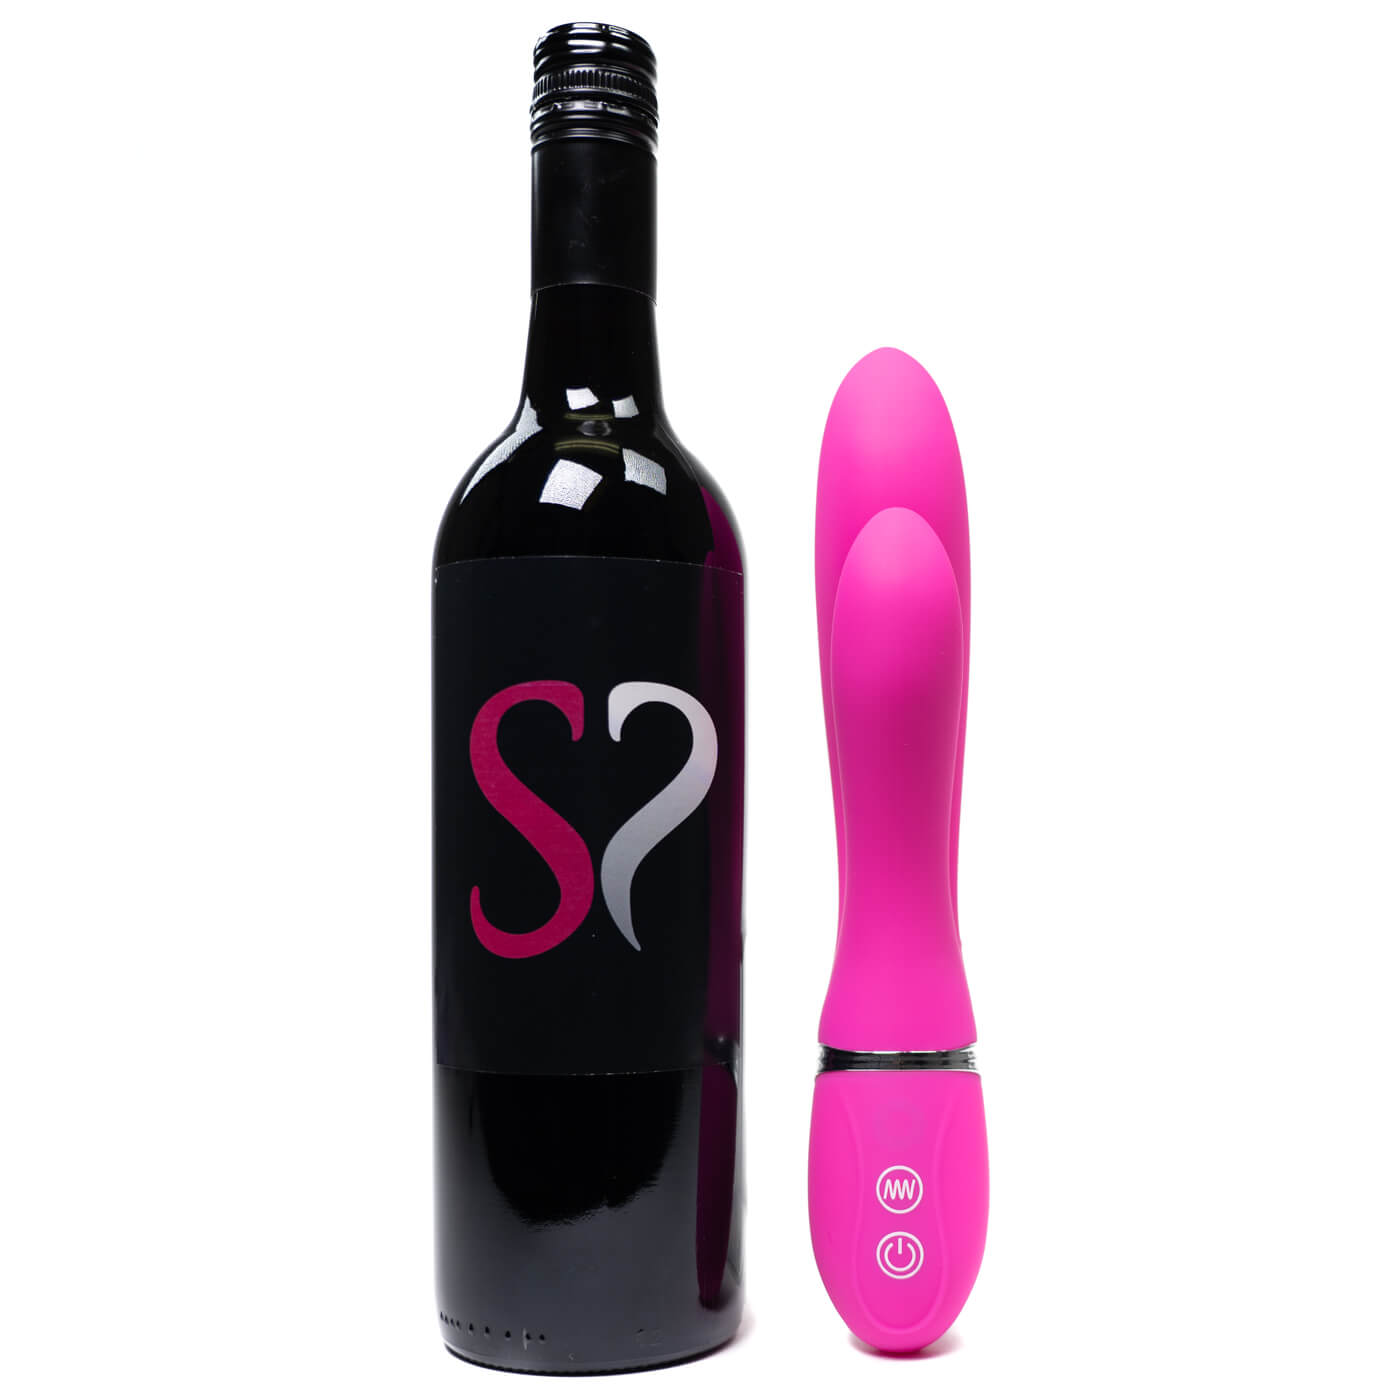 DUALITY 7 Function Dual Motor Extra Powerful Rechargeable Rabbit Vibrator